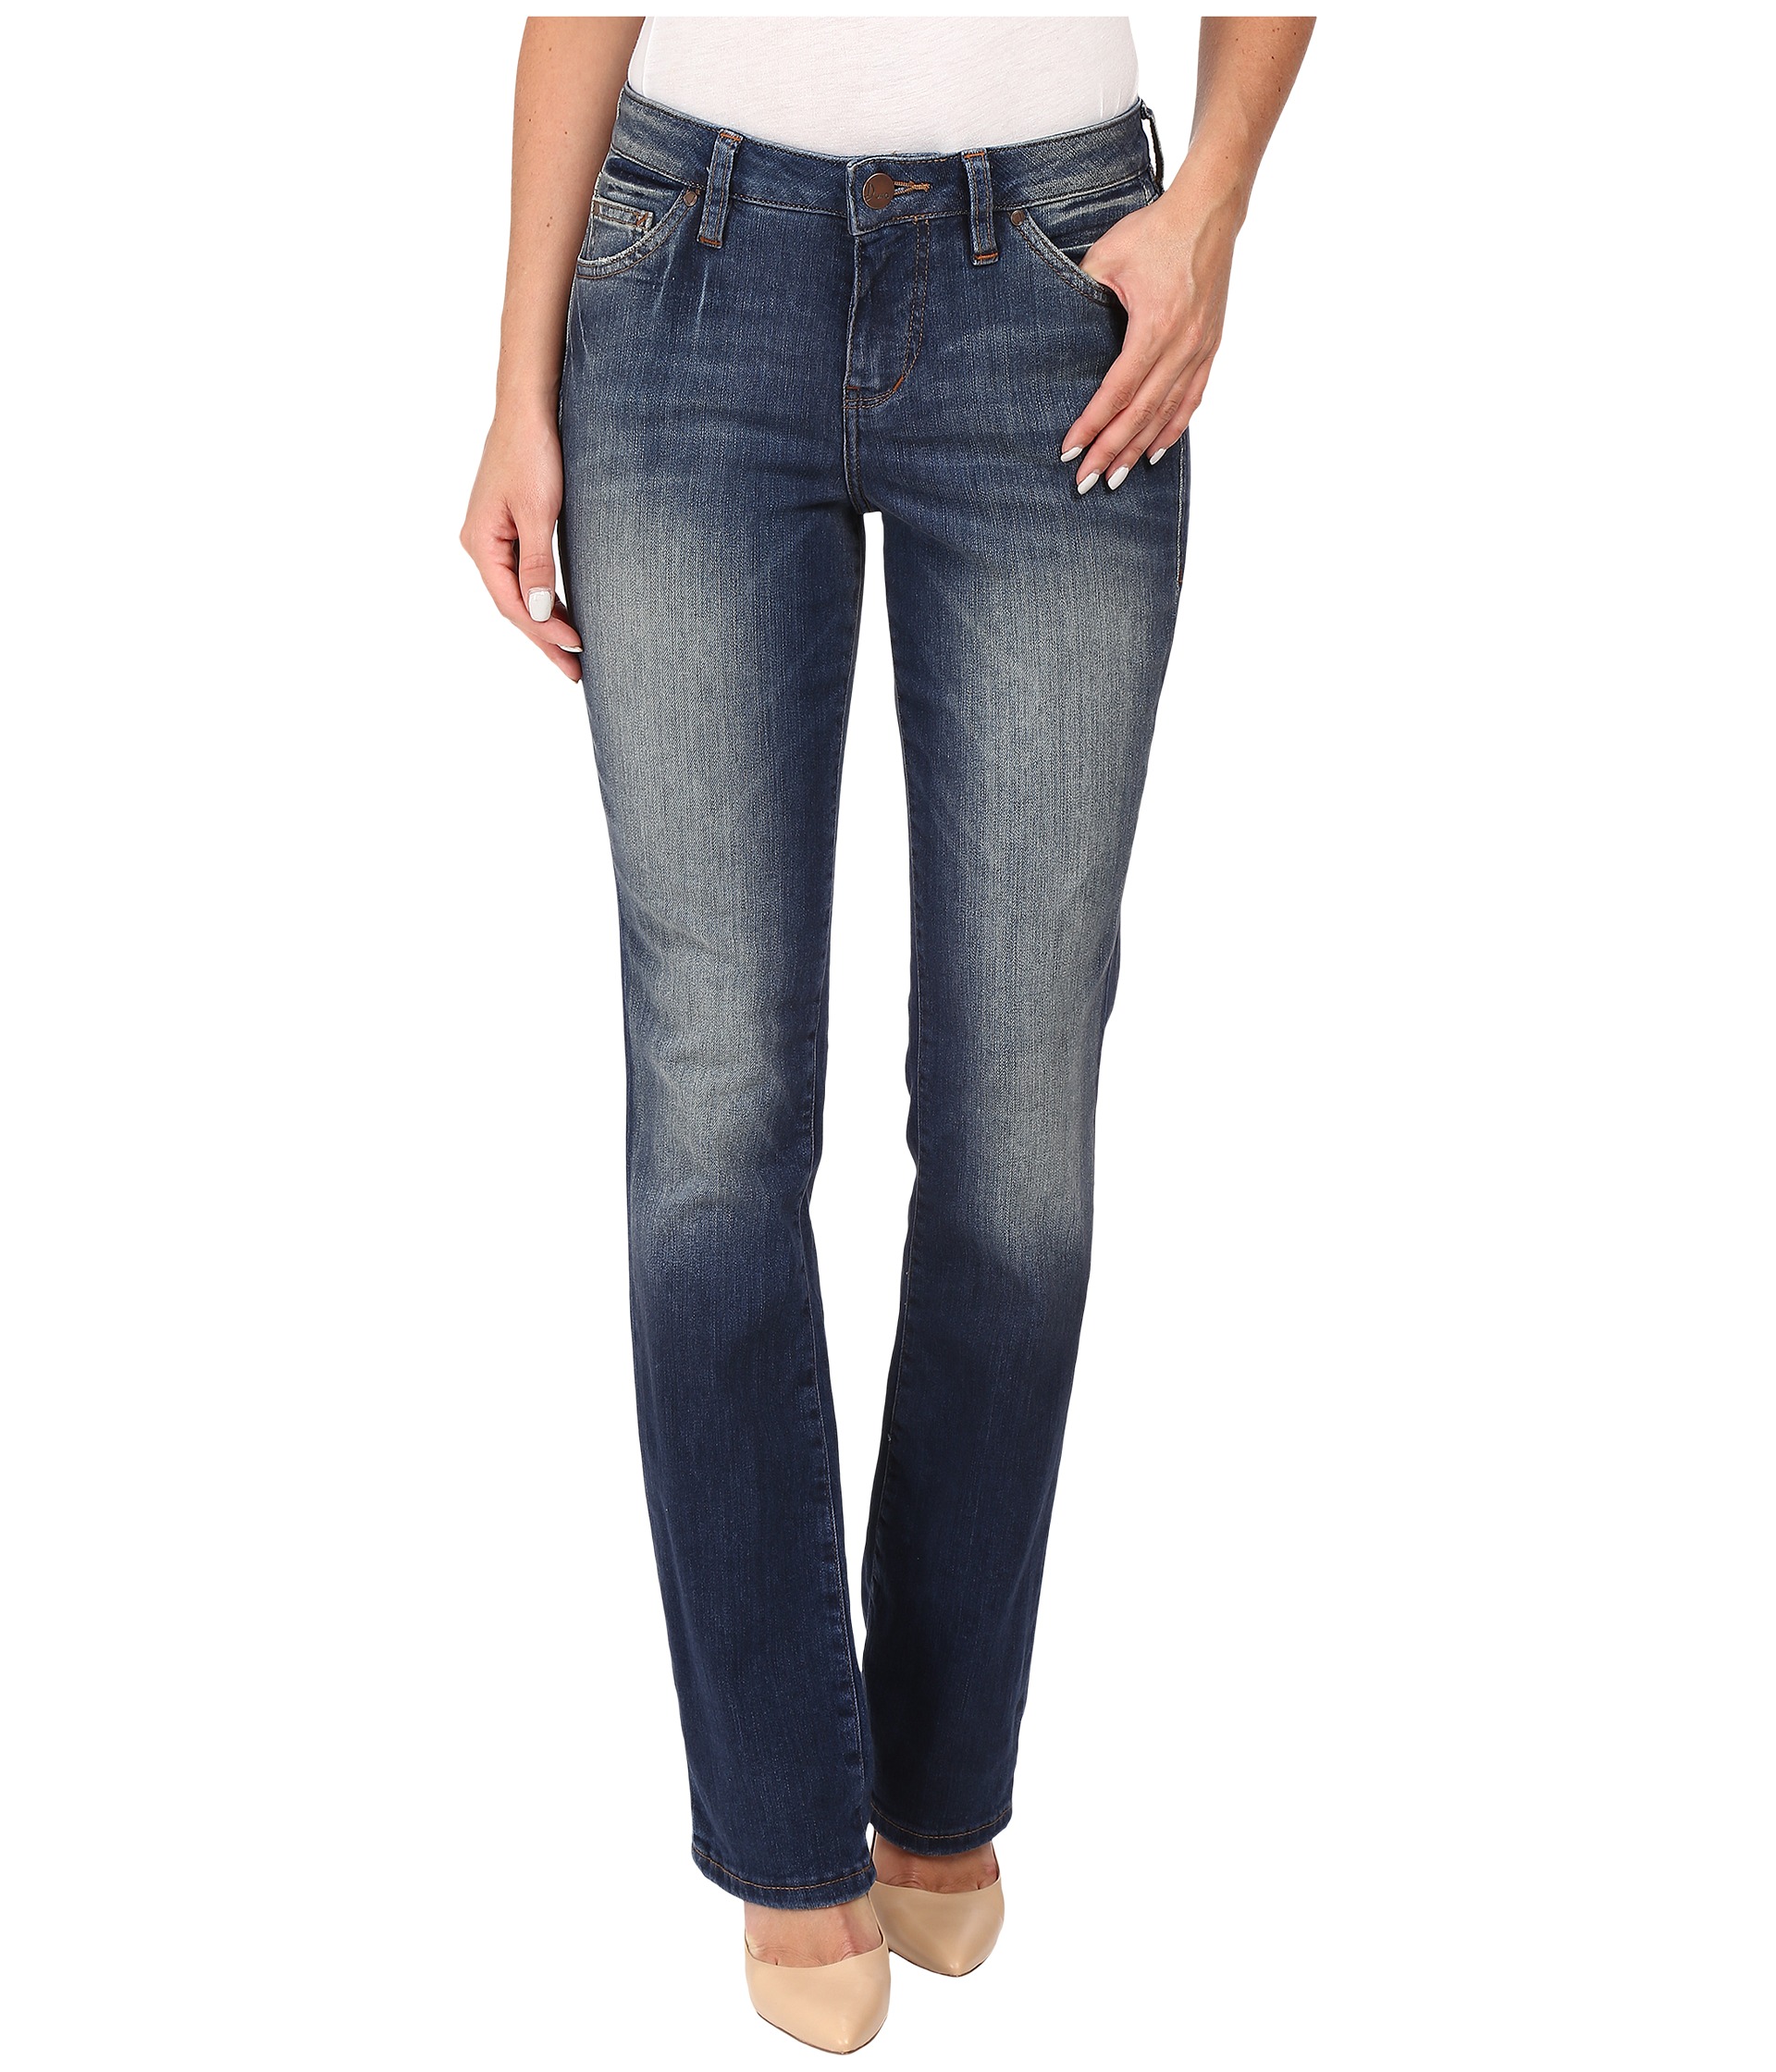 Jag Jeans Atwood Boot Platinum Denim in Soho at Zappos.com